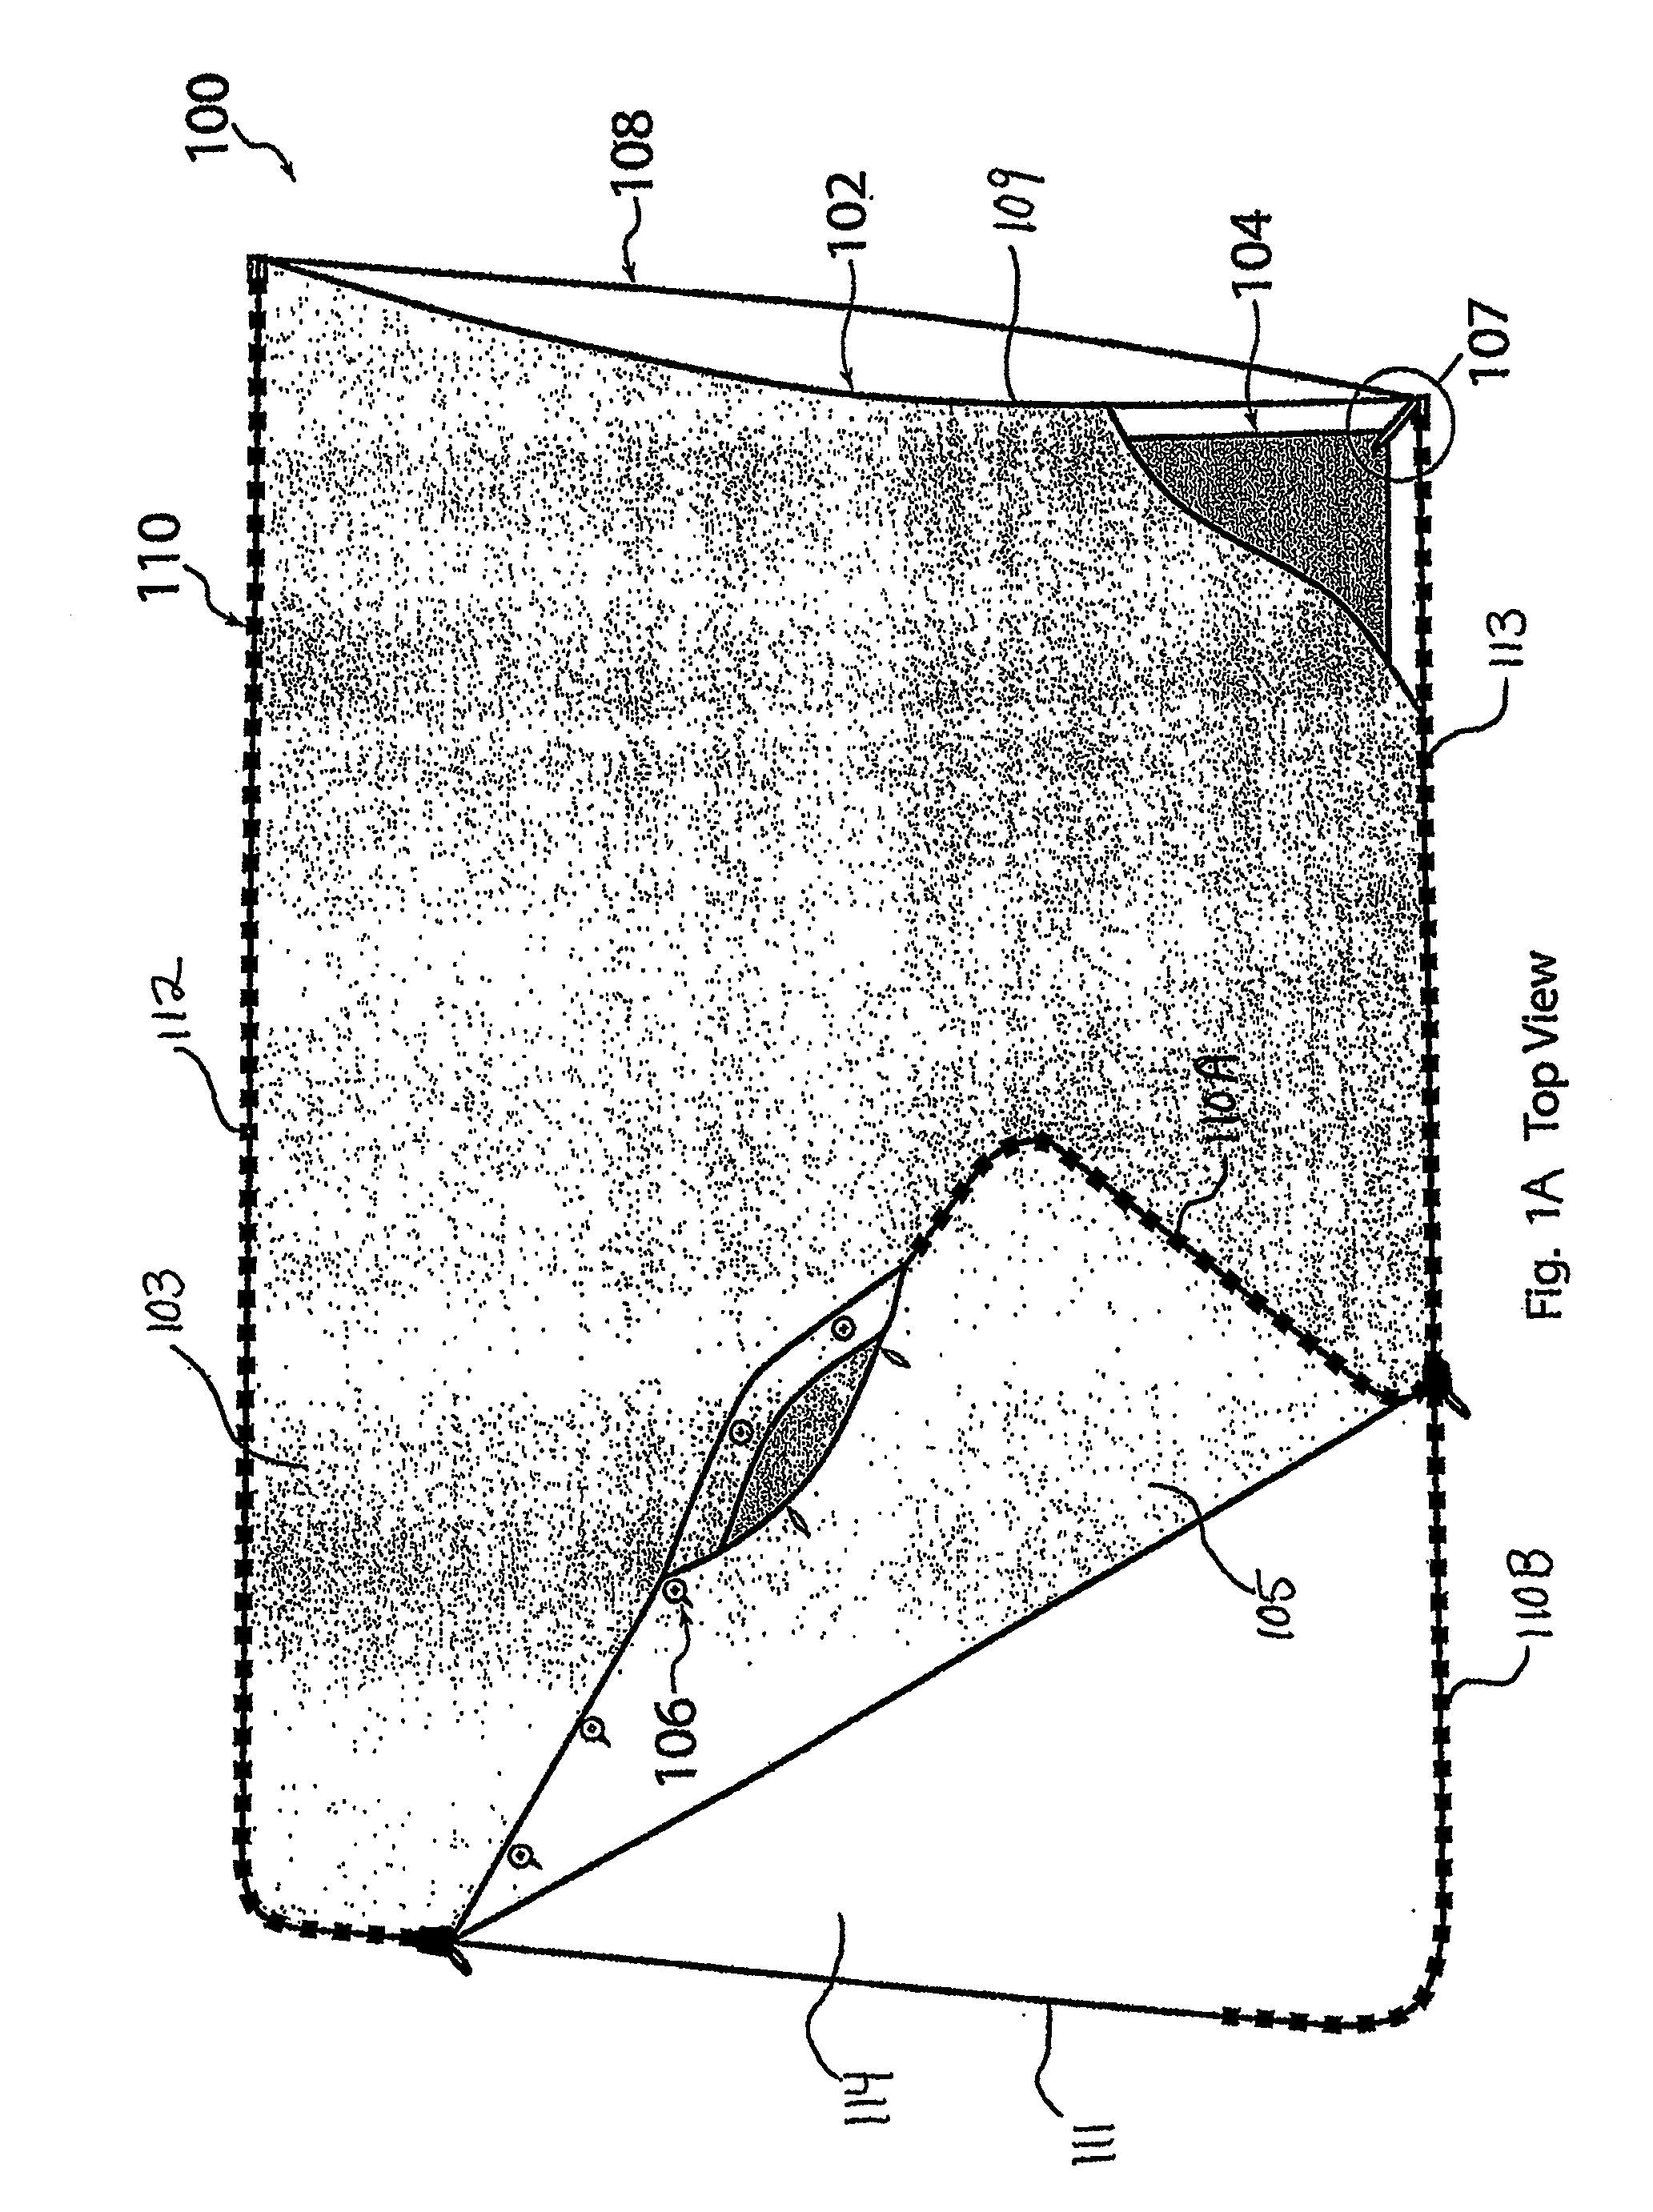 Integrated bedding cover system and method